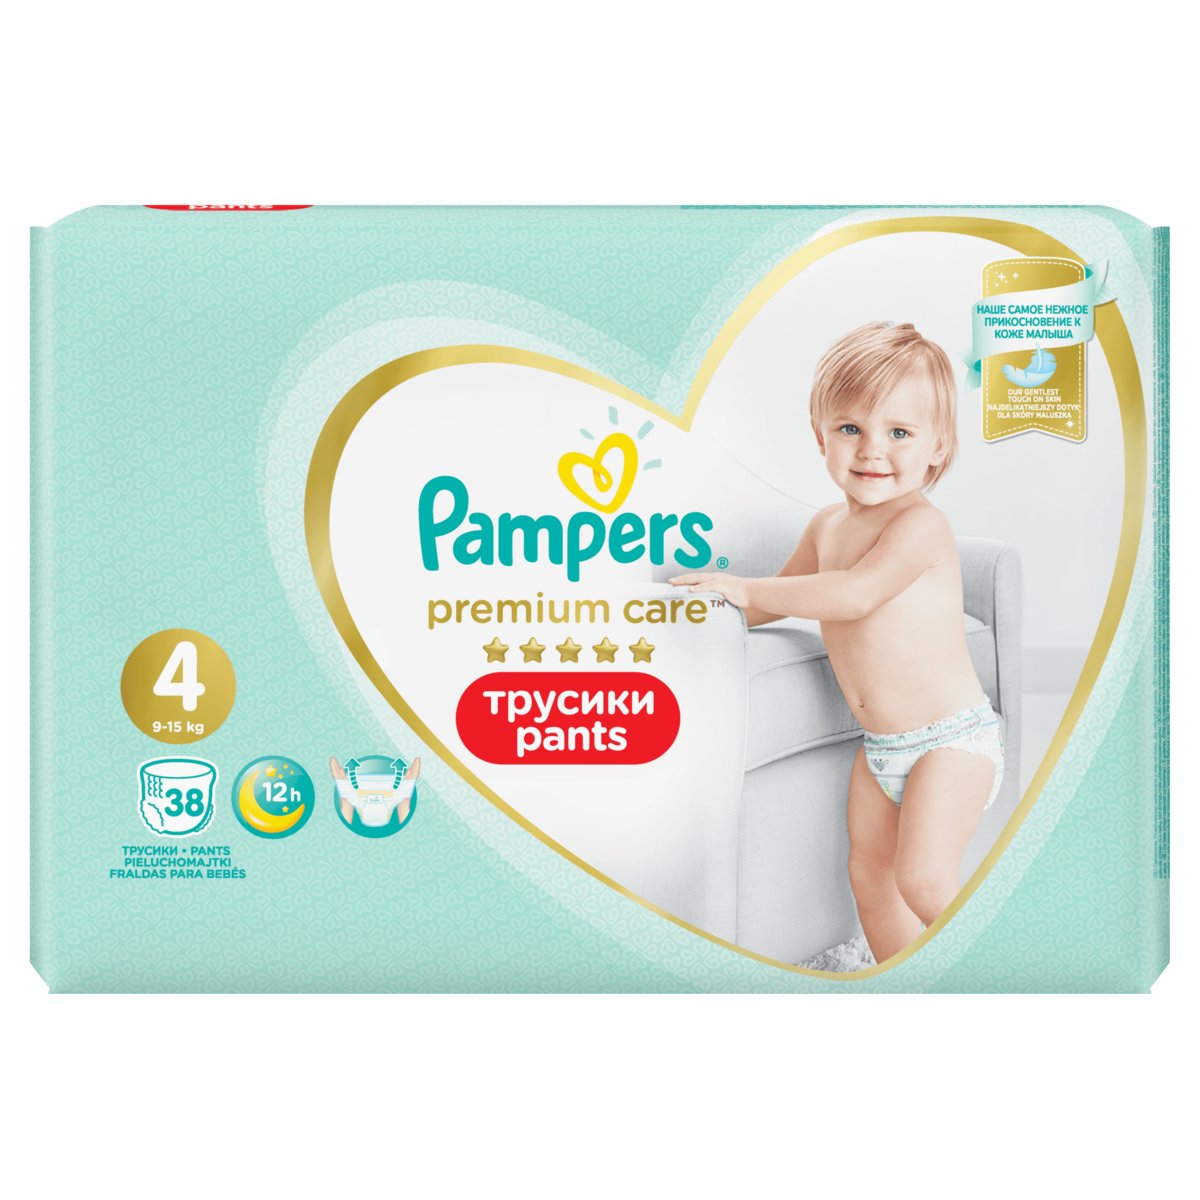 dada a pampers care